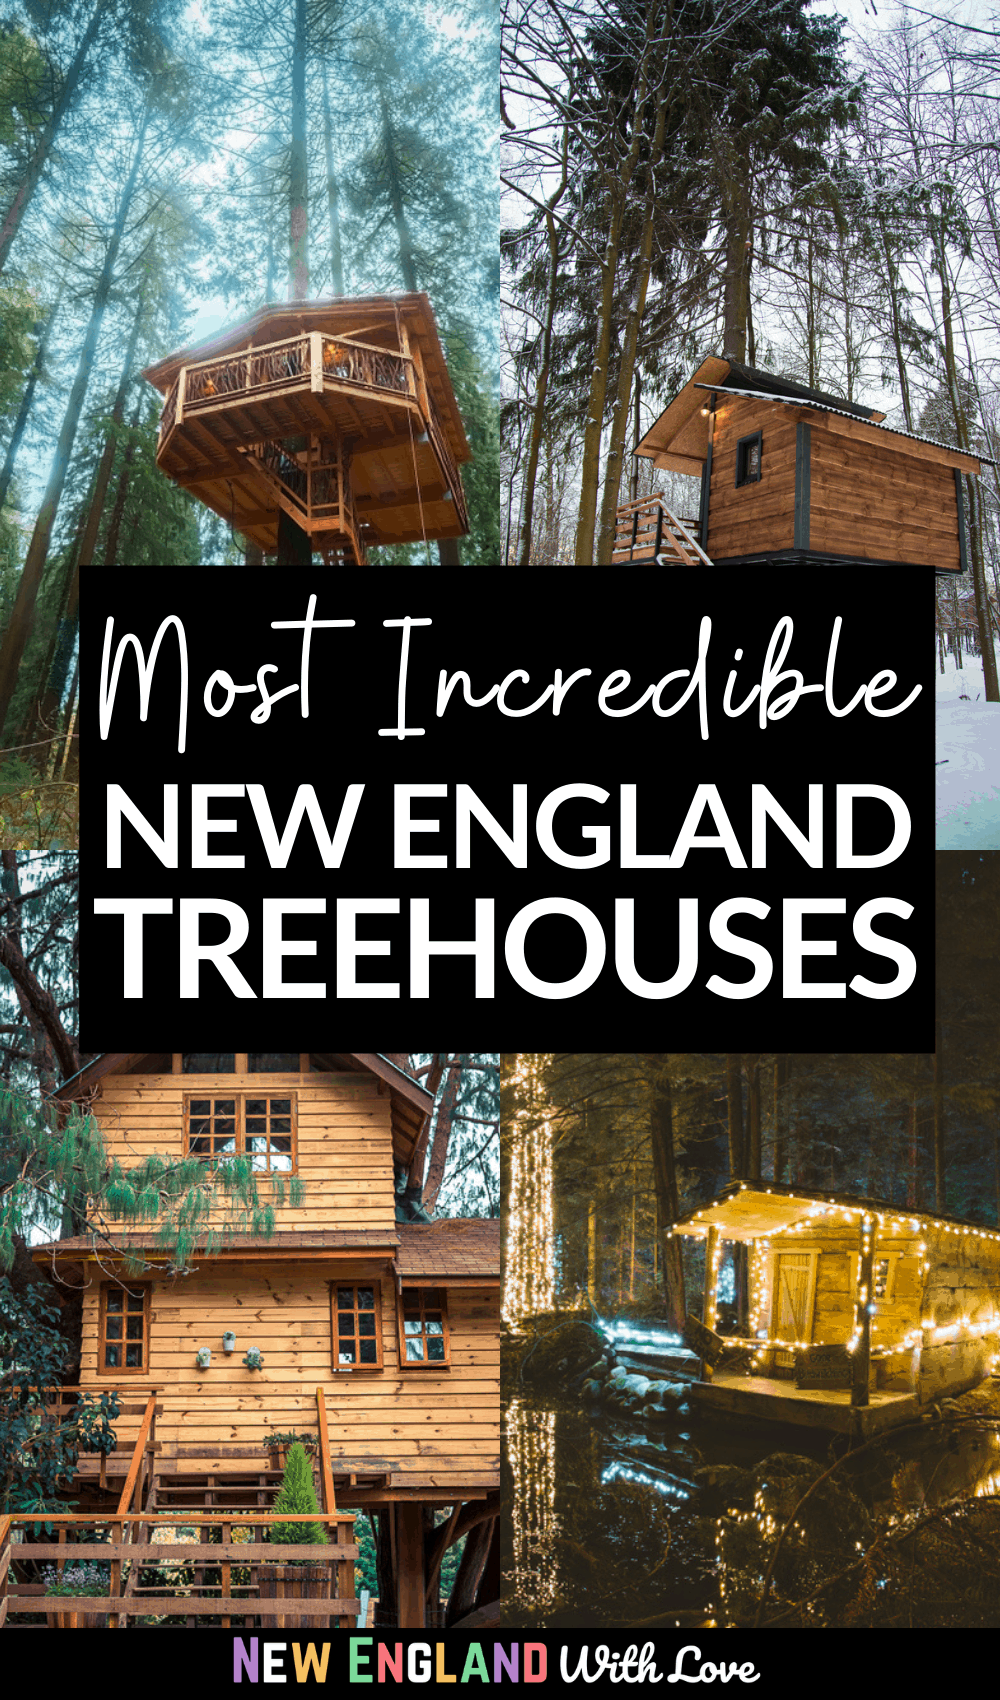 Pinterest graphic reading "Most Incredible NEW ENGLAND TREEHOUSES"